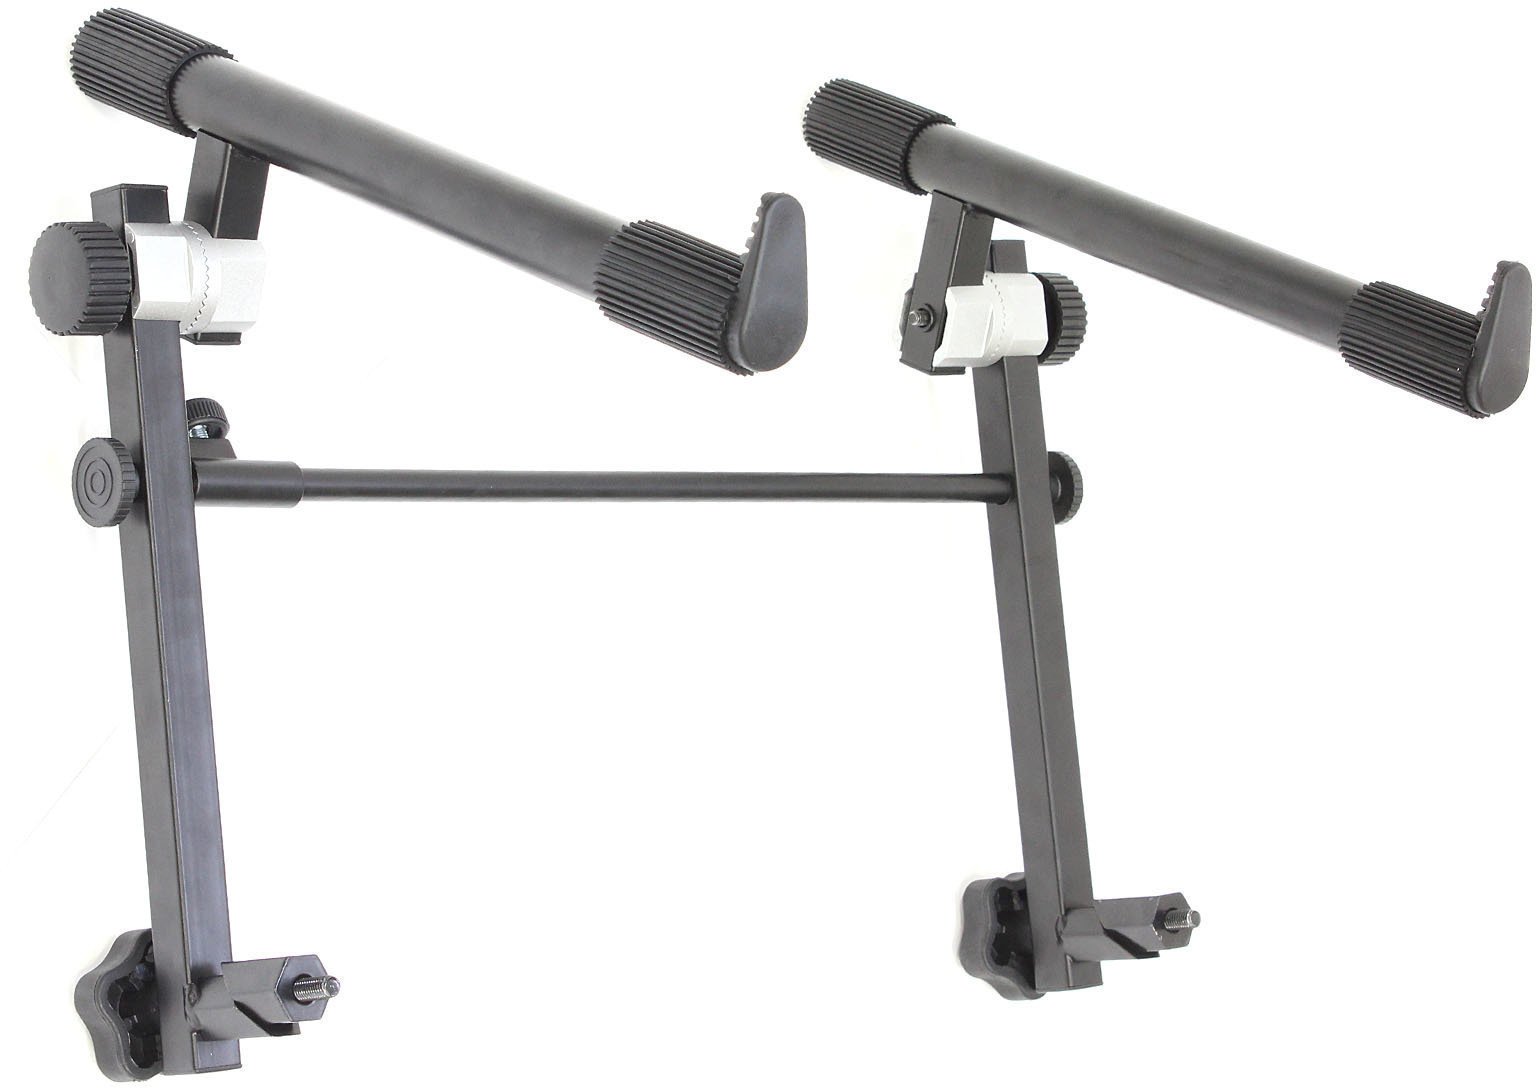 Keyboard stand accessories Soundking DF 087 (Just unboxed)